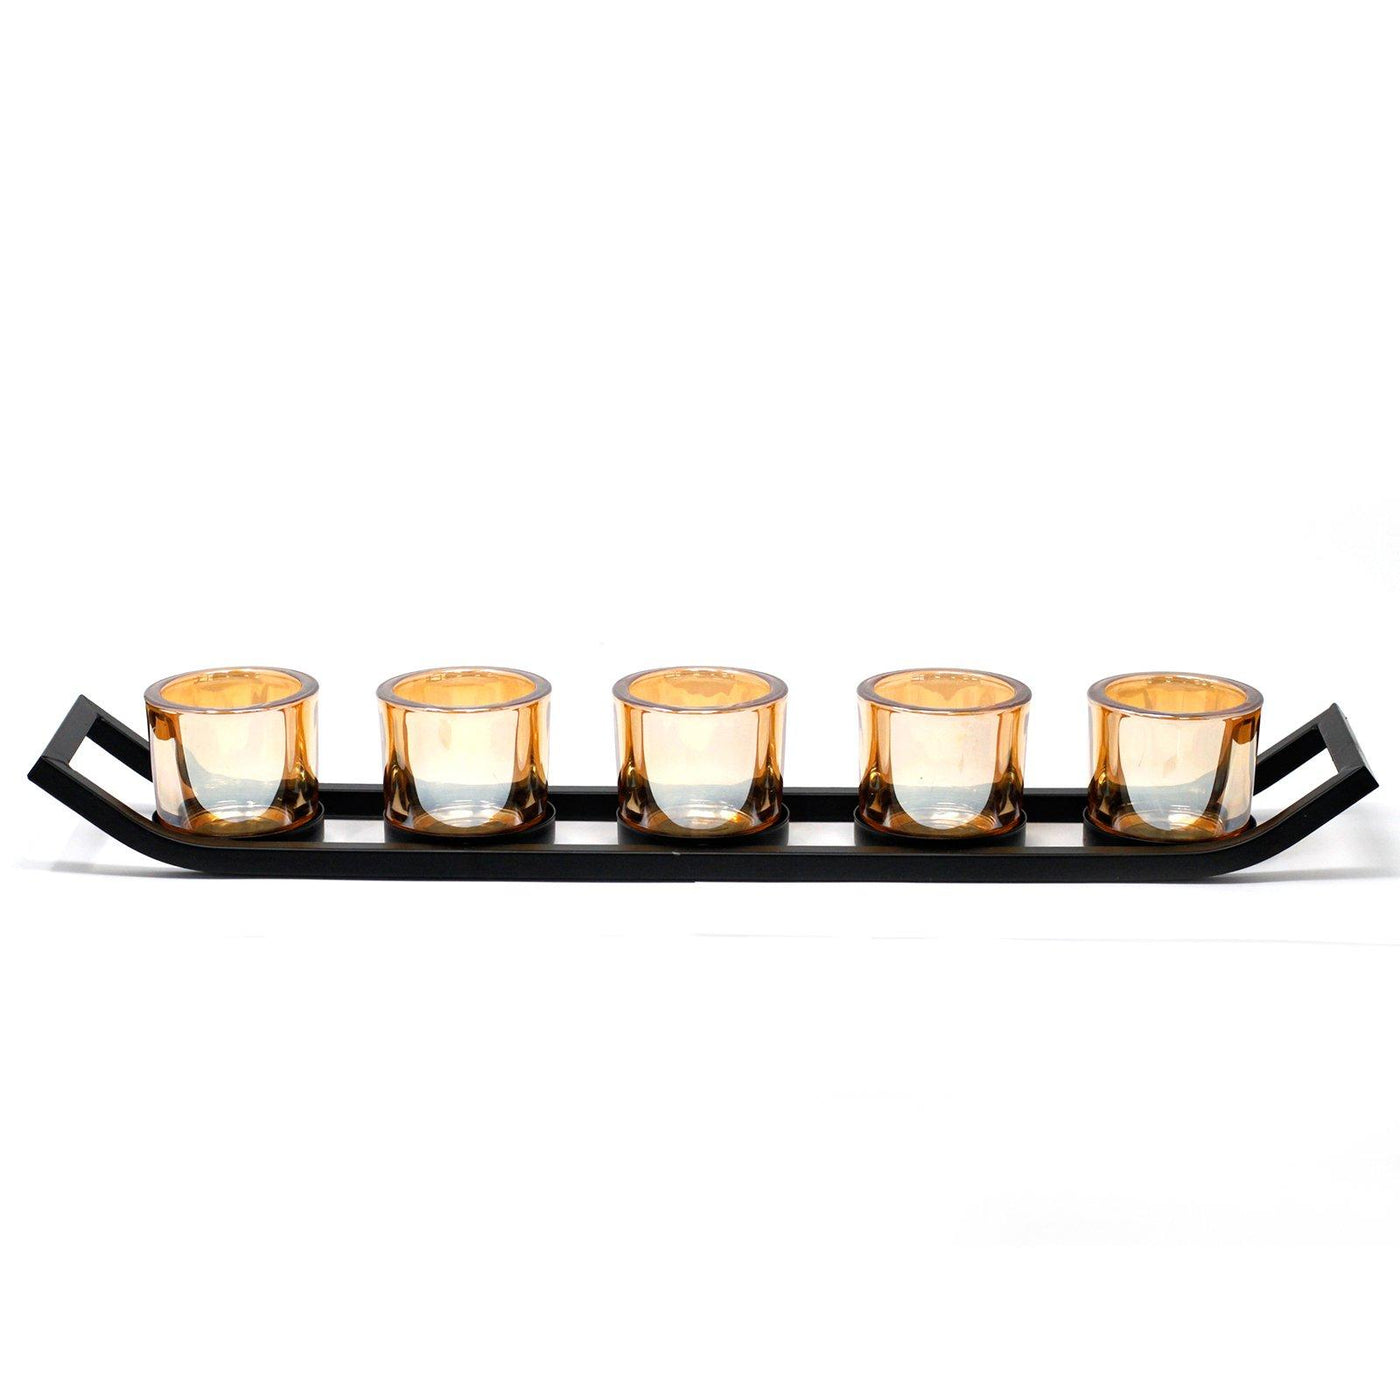 Centrepiece Ledge Style 5 Gold Amber Glass And Iron Votive Candle Holder.